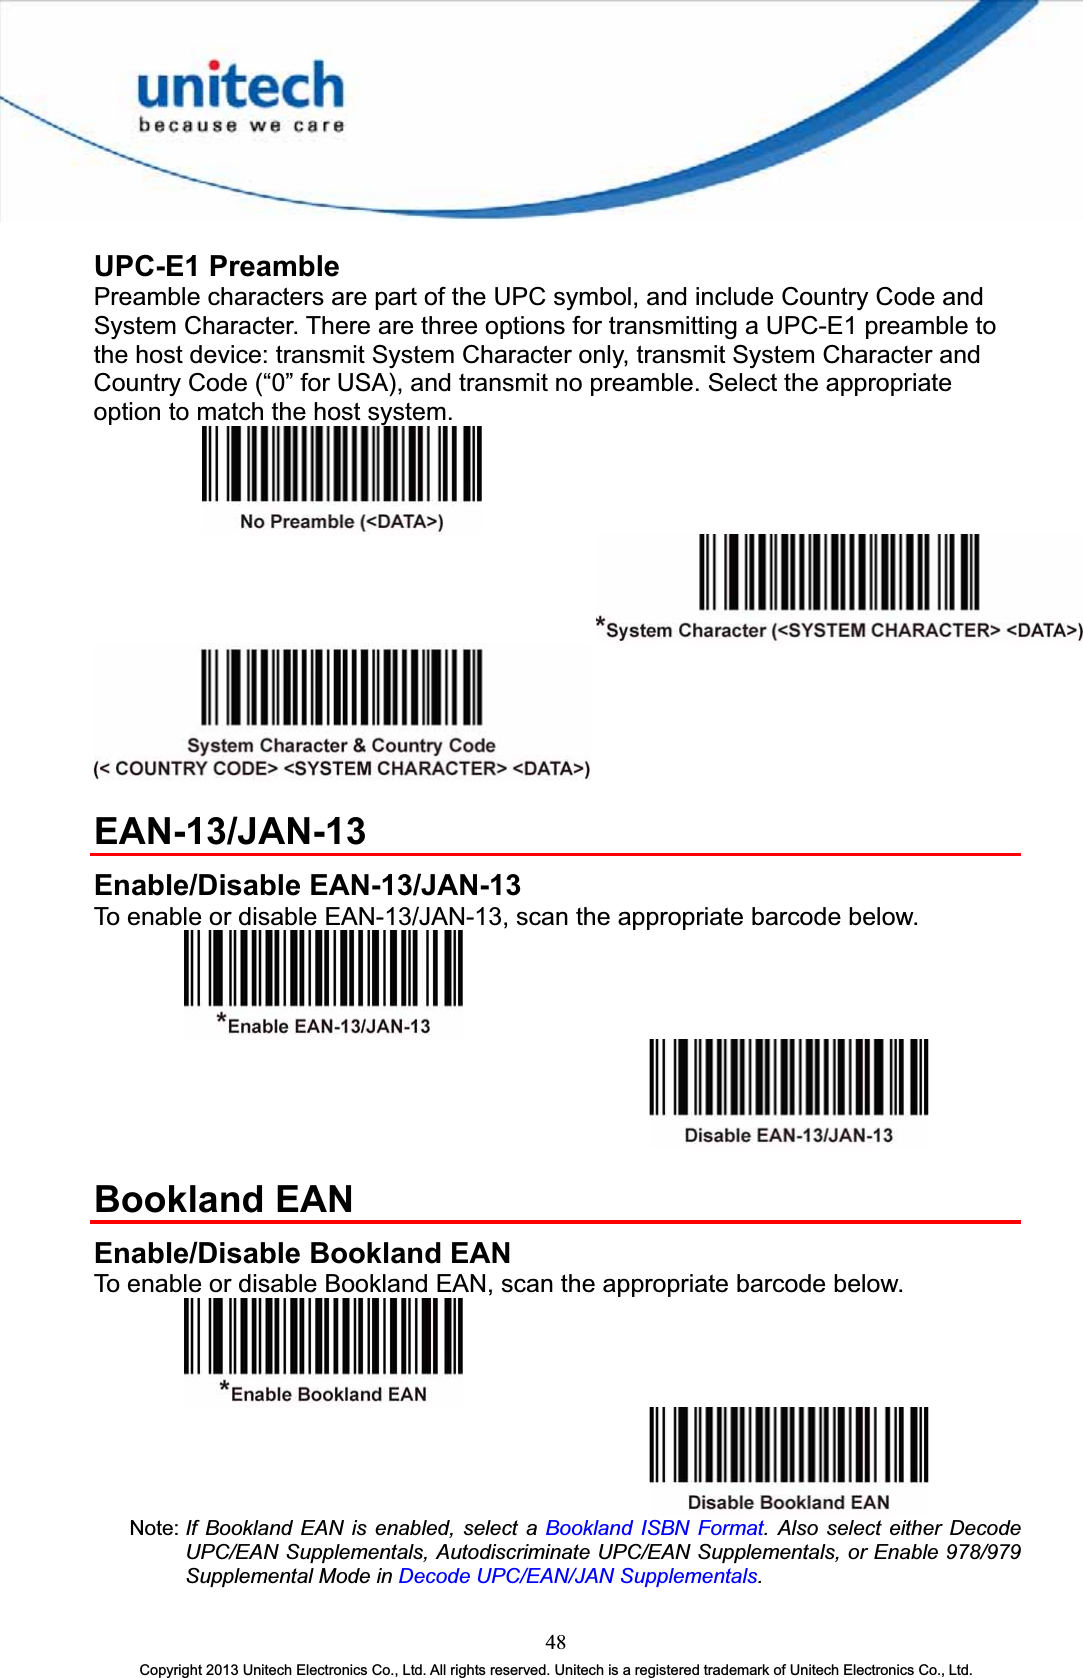 UPC-E1 Preamble Preamble characters are part of the UPC symbol, and include Country Code and System Character. There are three options for transmitting a UPC-E1 preamble to the host device: transmit System Character only, transmit System Character and Country Code (“0” for USA), and transmit no preamble. Select the appropriate option to match the host system. EAN-13/JAN-13Enable/Disable EAN-13/JAN-13 To enable or disable EAN-13/JAN-13, scan the appropriate barcode below. Bookland EAN Enable/Disable Bookland EAN To enable or disable Bookland EAN, scan the appropriate barcode below. Note: If Bookland EAN is enabled, select a Bookland ISBN Format. Also select either Decode UPC/EAN Supplementals, Autodiscriminate UPC/EAN Supplementals, or Enable 978/979 Supplemental Mode in Decode UPC/EAN/JAN Supplementals.48Copyright 2013 Unitech Electronics Co., Ltd. All rights reserved. Unitech is a registered trademark of Unitech Electronics Co., Ltd. 